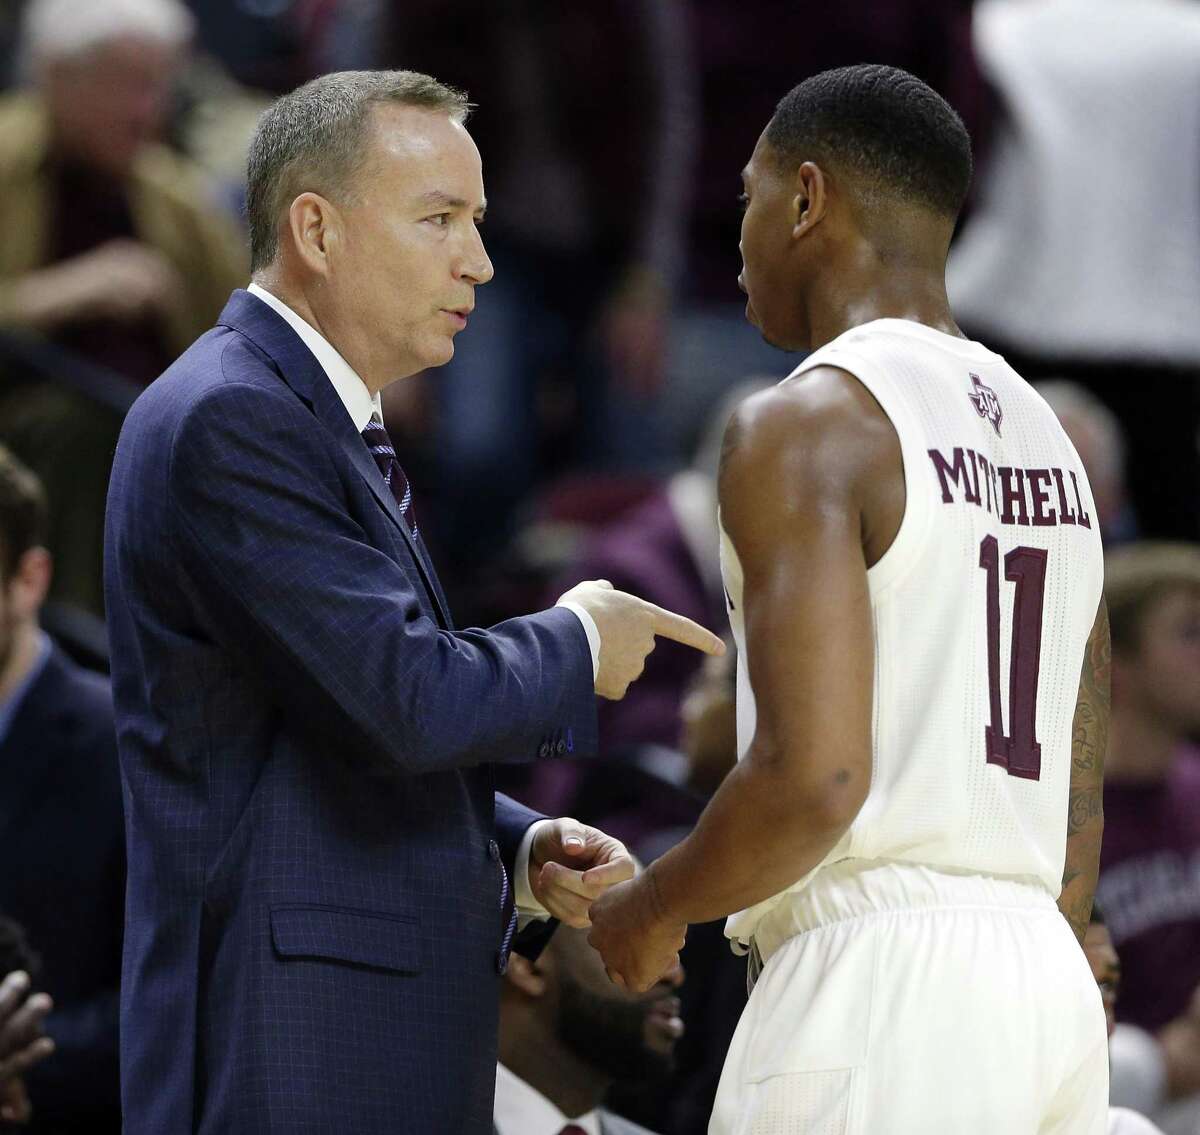 Texas A&M head coach Billy Kennedy talks with guard Wendell Mitchell (11) between plays during the first half of an NCAA college basketball game against Auburn, Wednesday, Jan. 16, 2019, in College Station, Texas. (AP Photo/Michael Wyke)